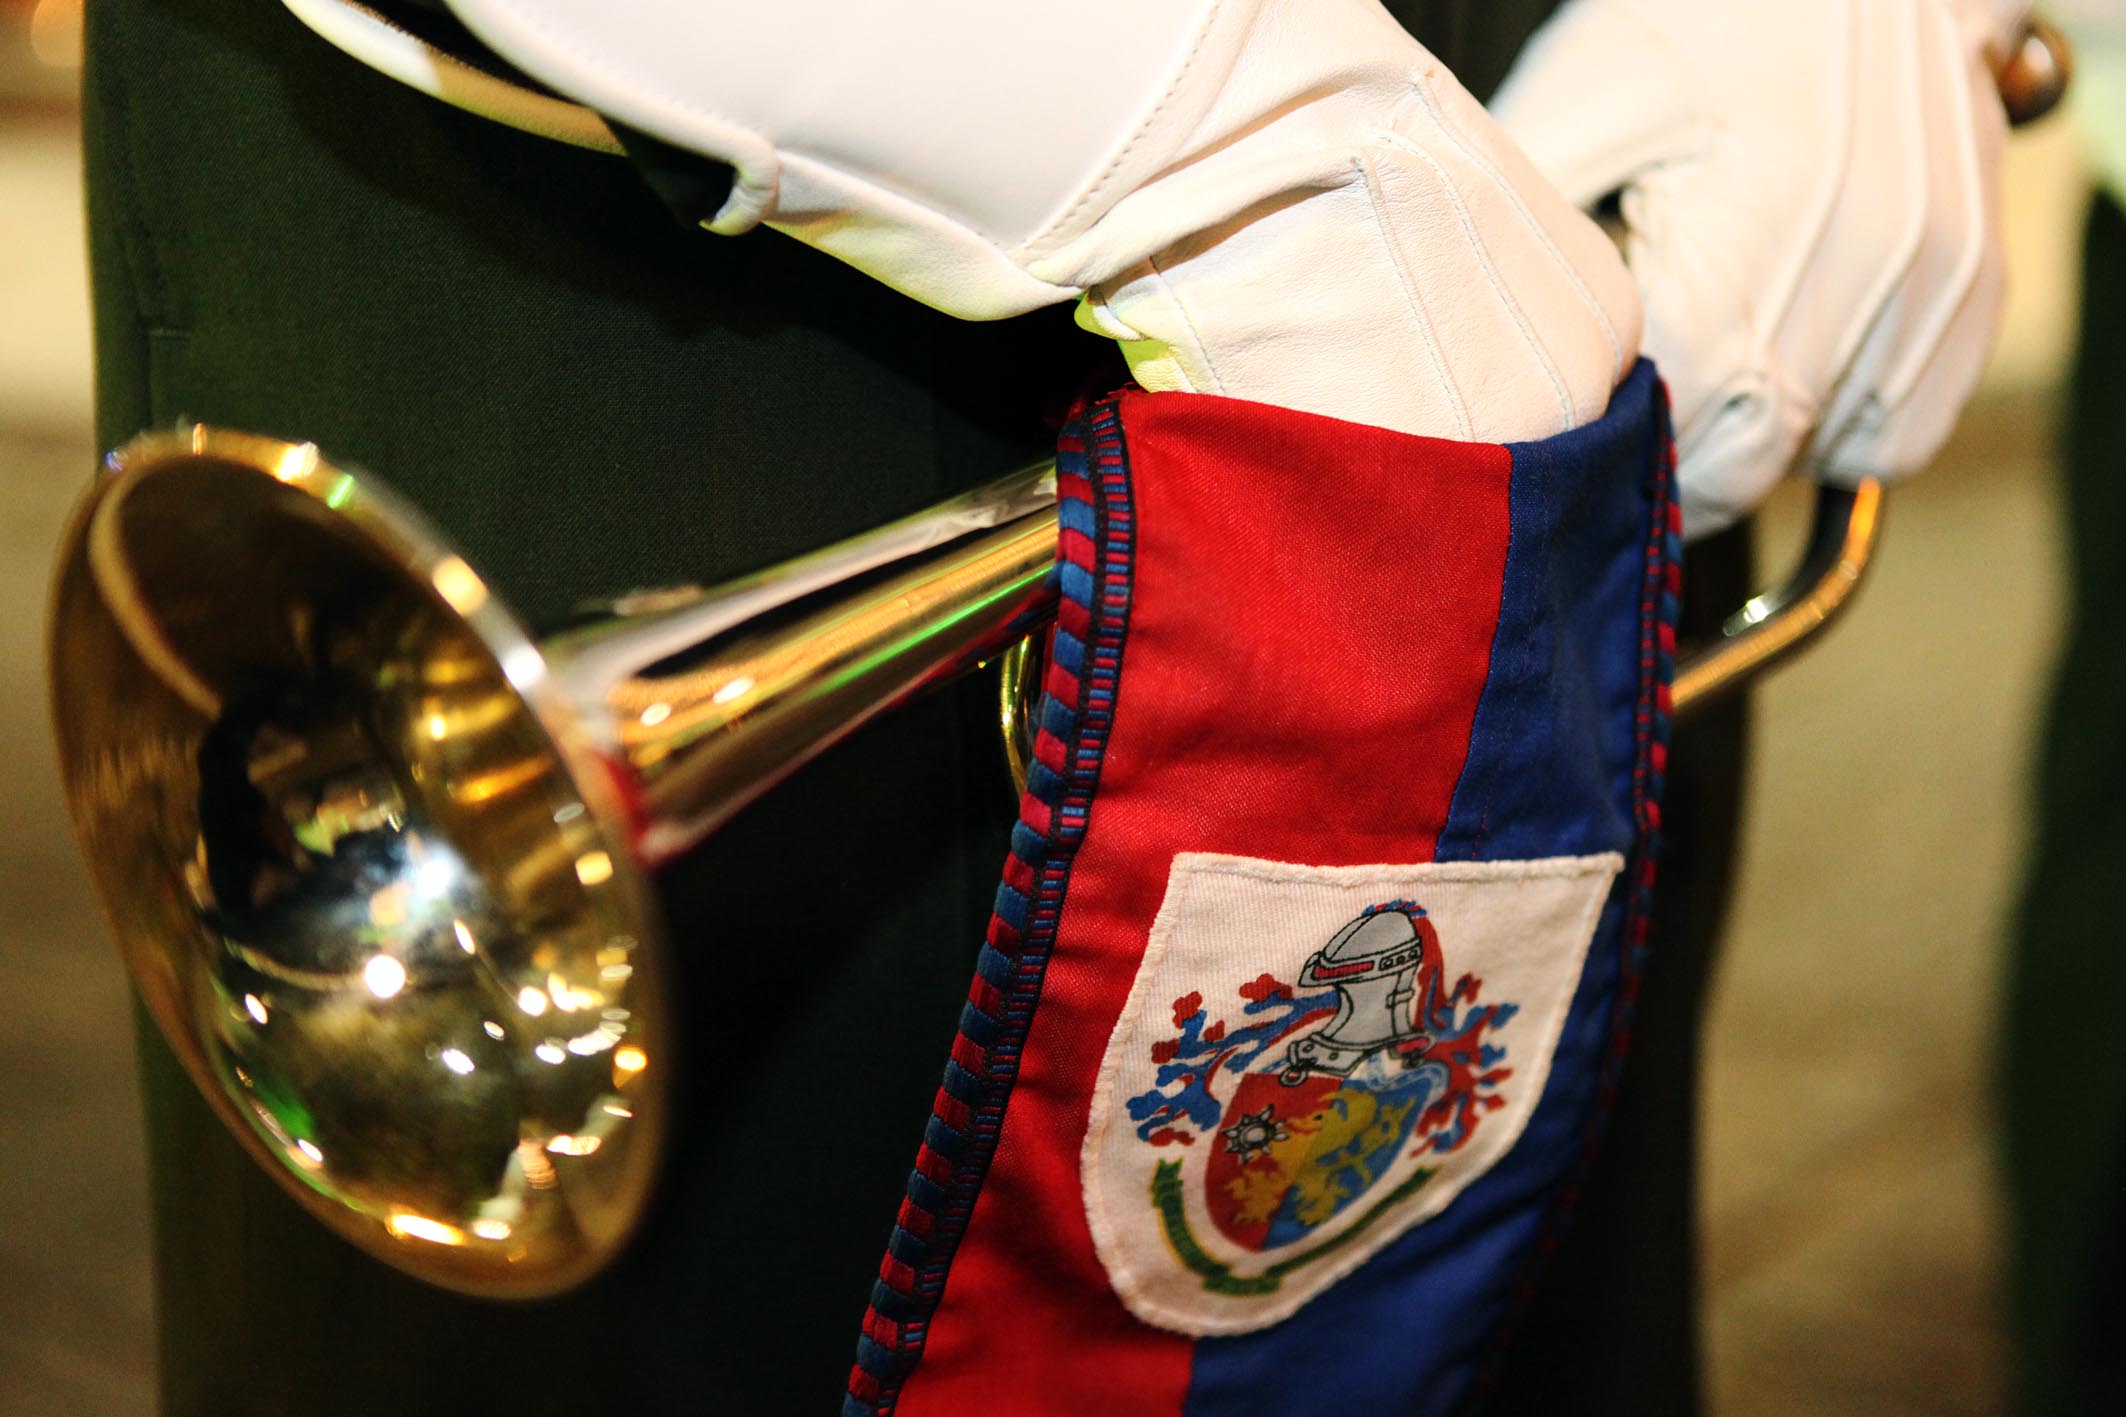 a trombone is displayed with the red, white and blue material